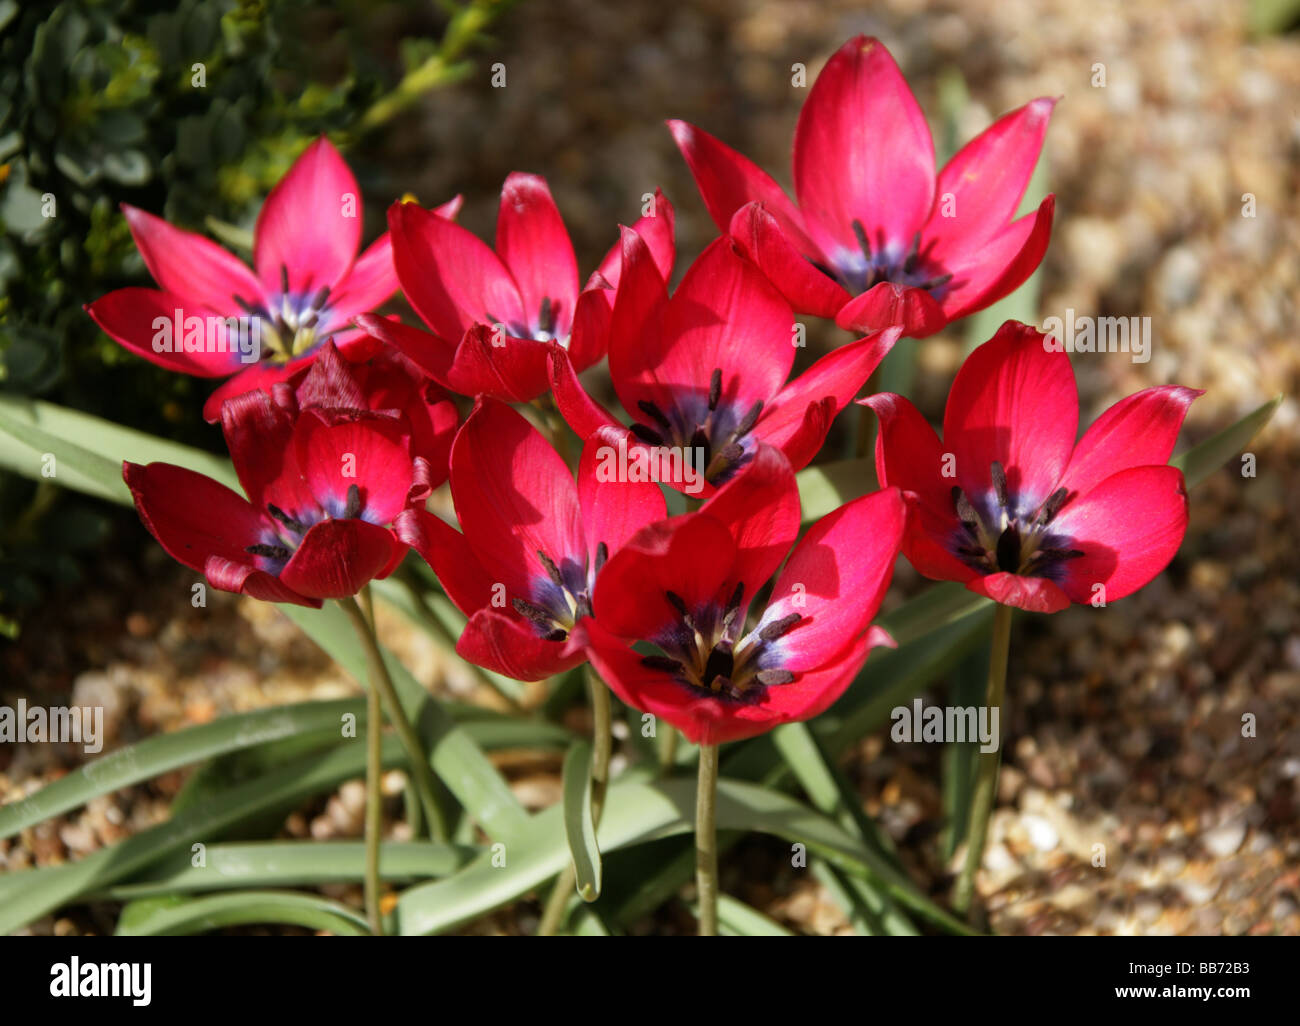 Tulipa humilis, Liliaceae. A Red Tulip from Iran and Turkey Stock Photo